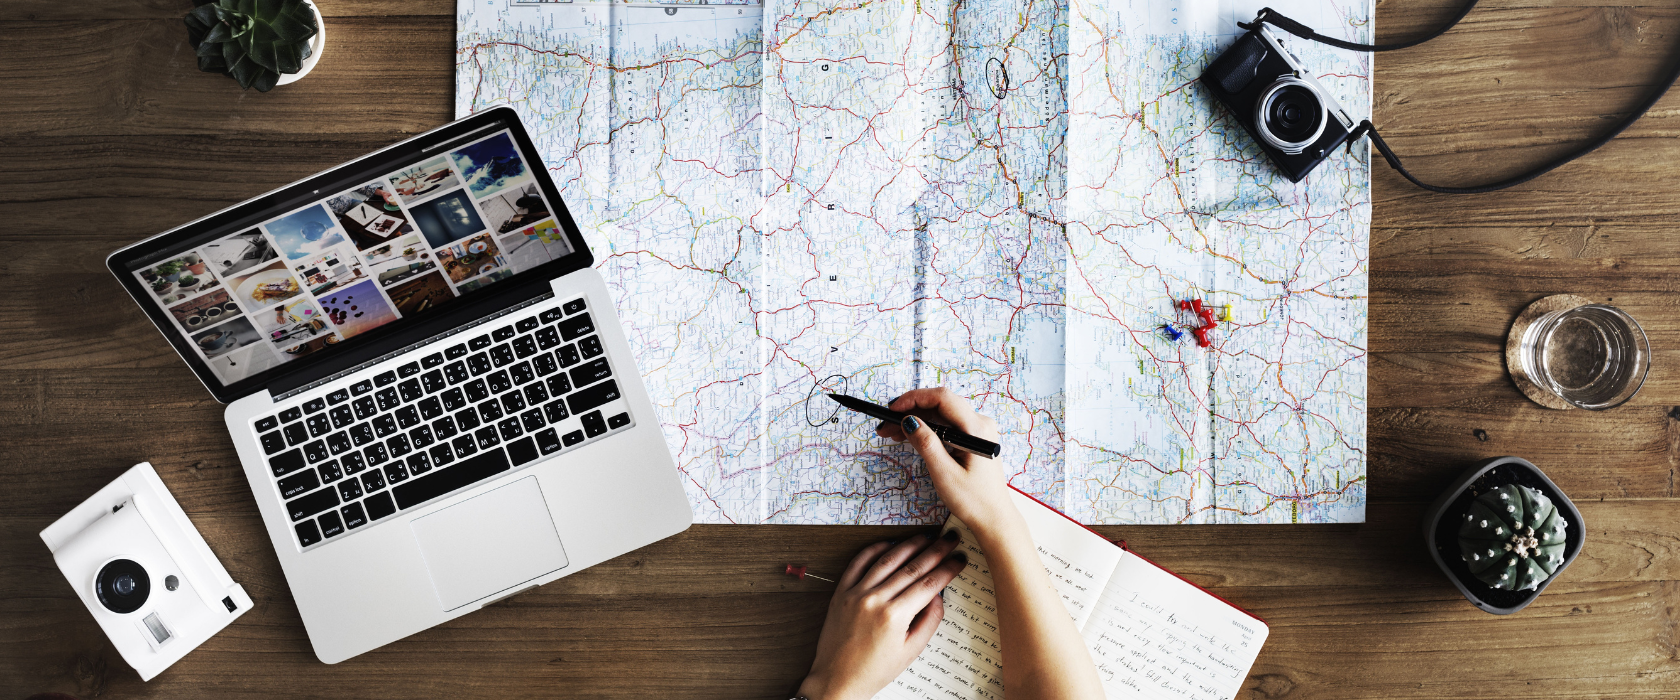 A person uses a map, notebook and laptop to plan a trip.